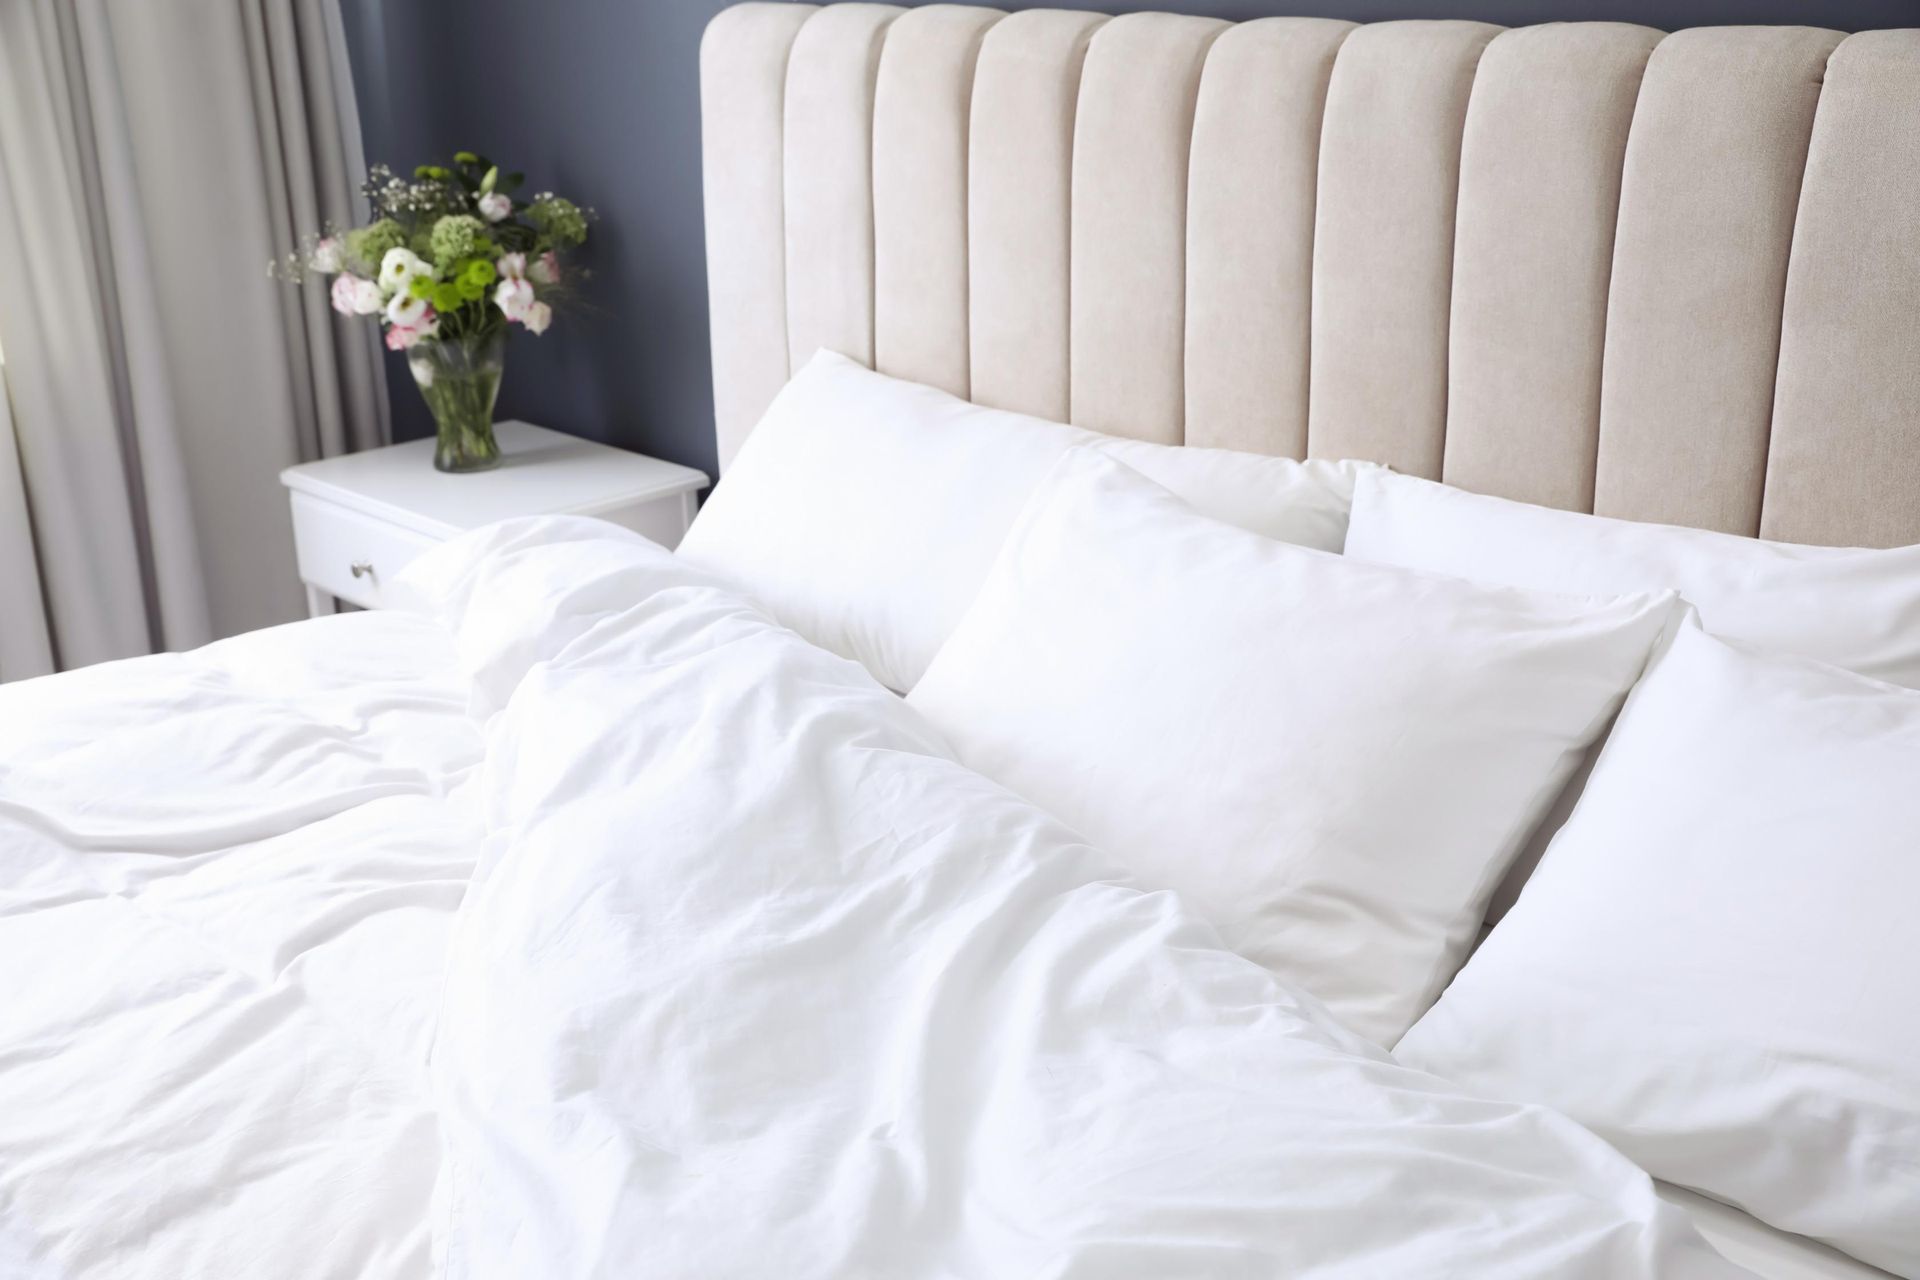 a bed with white sheets and pillows in a bedroom with a vase of flowers on the nightstand